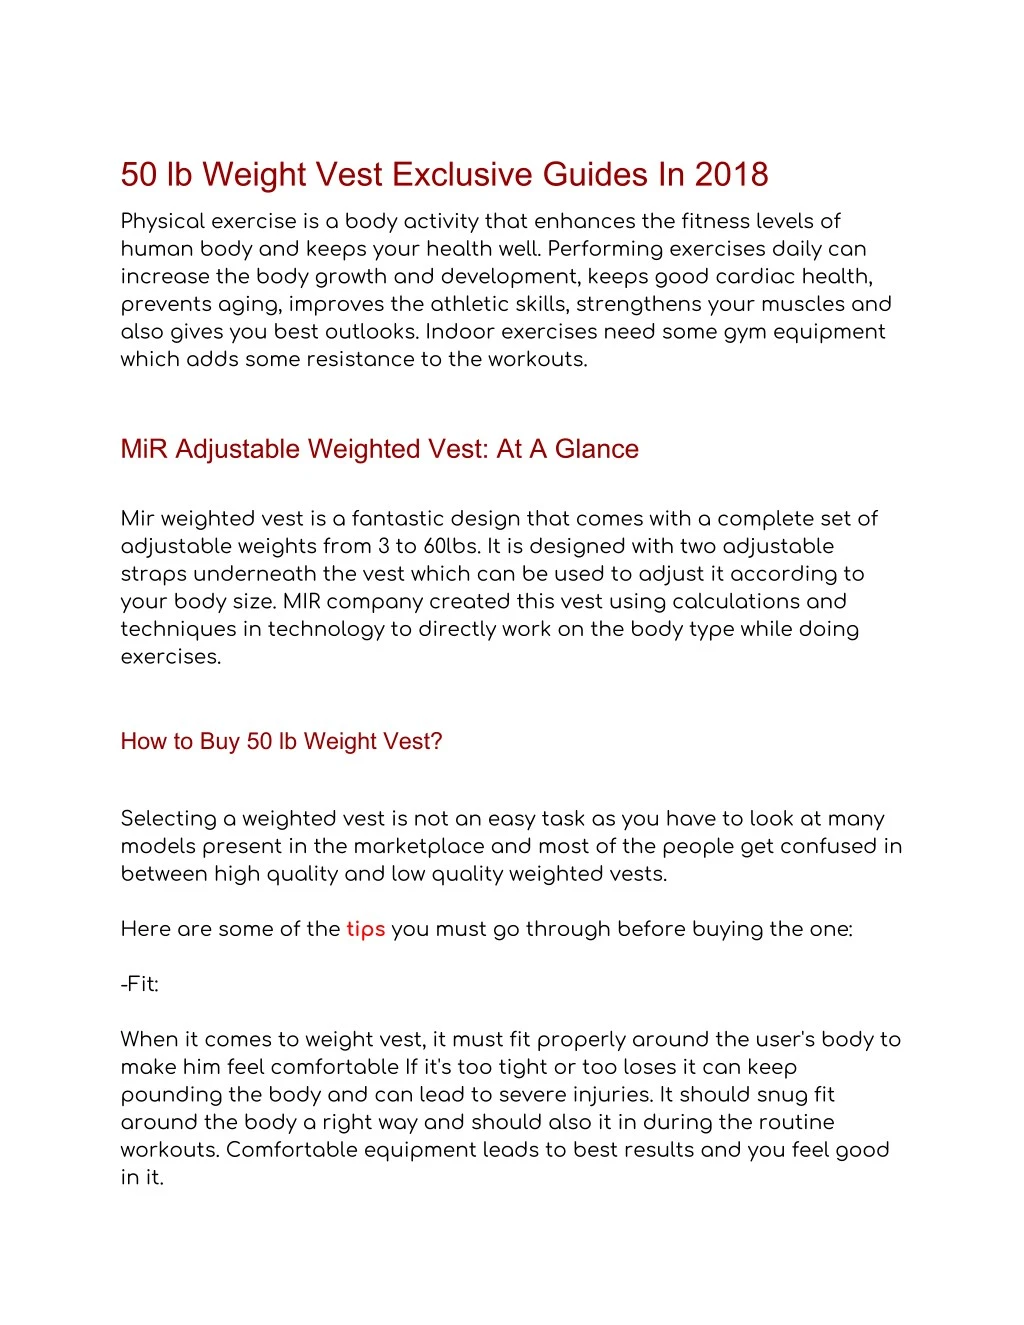 50 lb weight vest exclusive guides in 2018